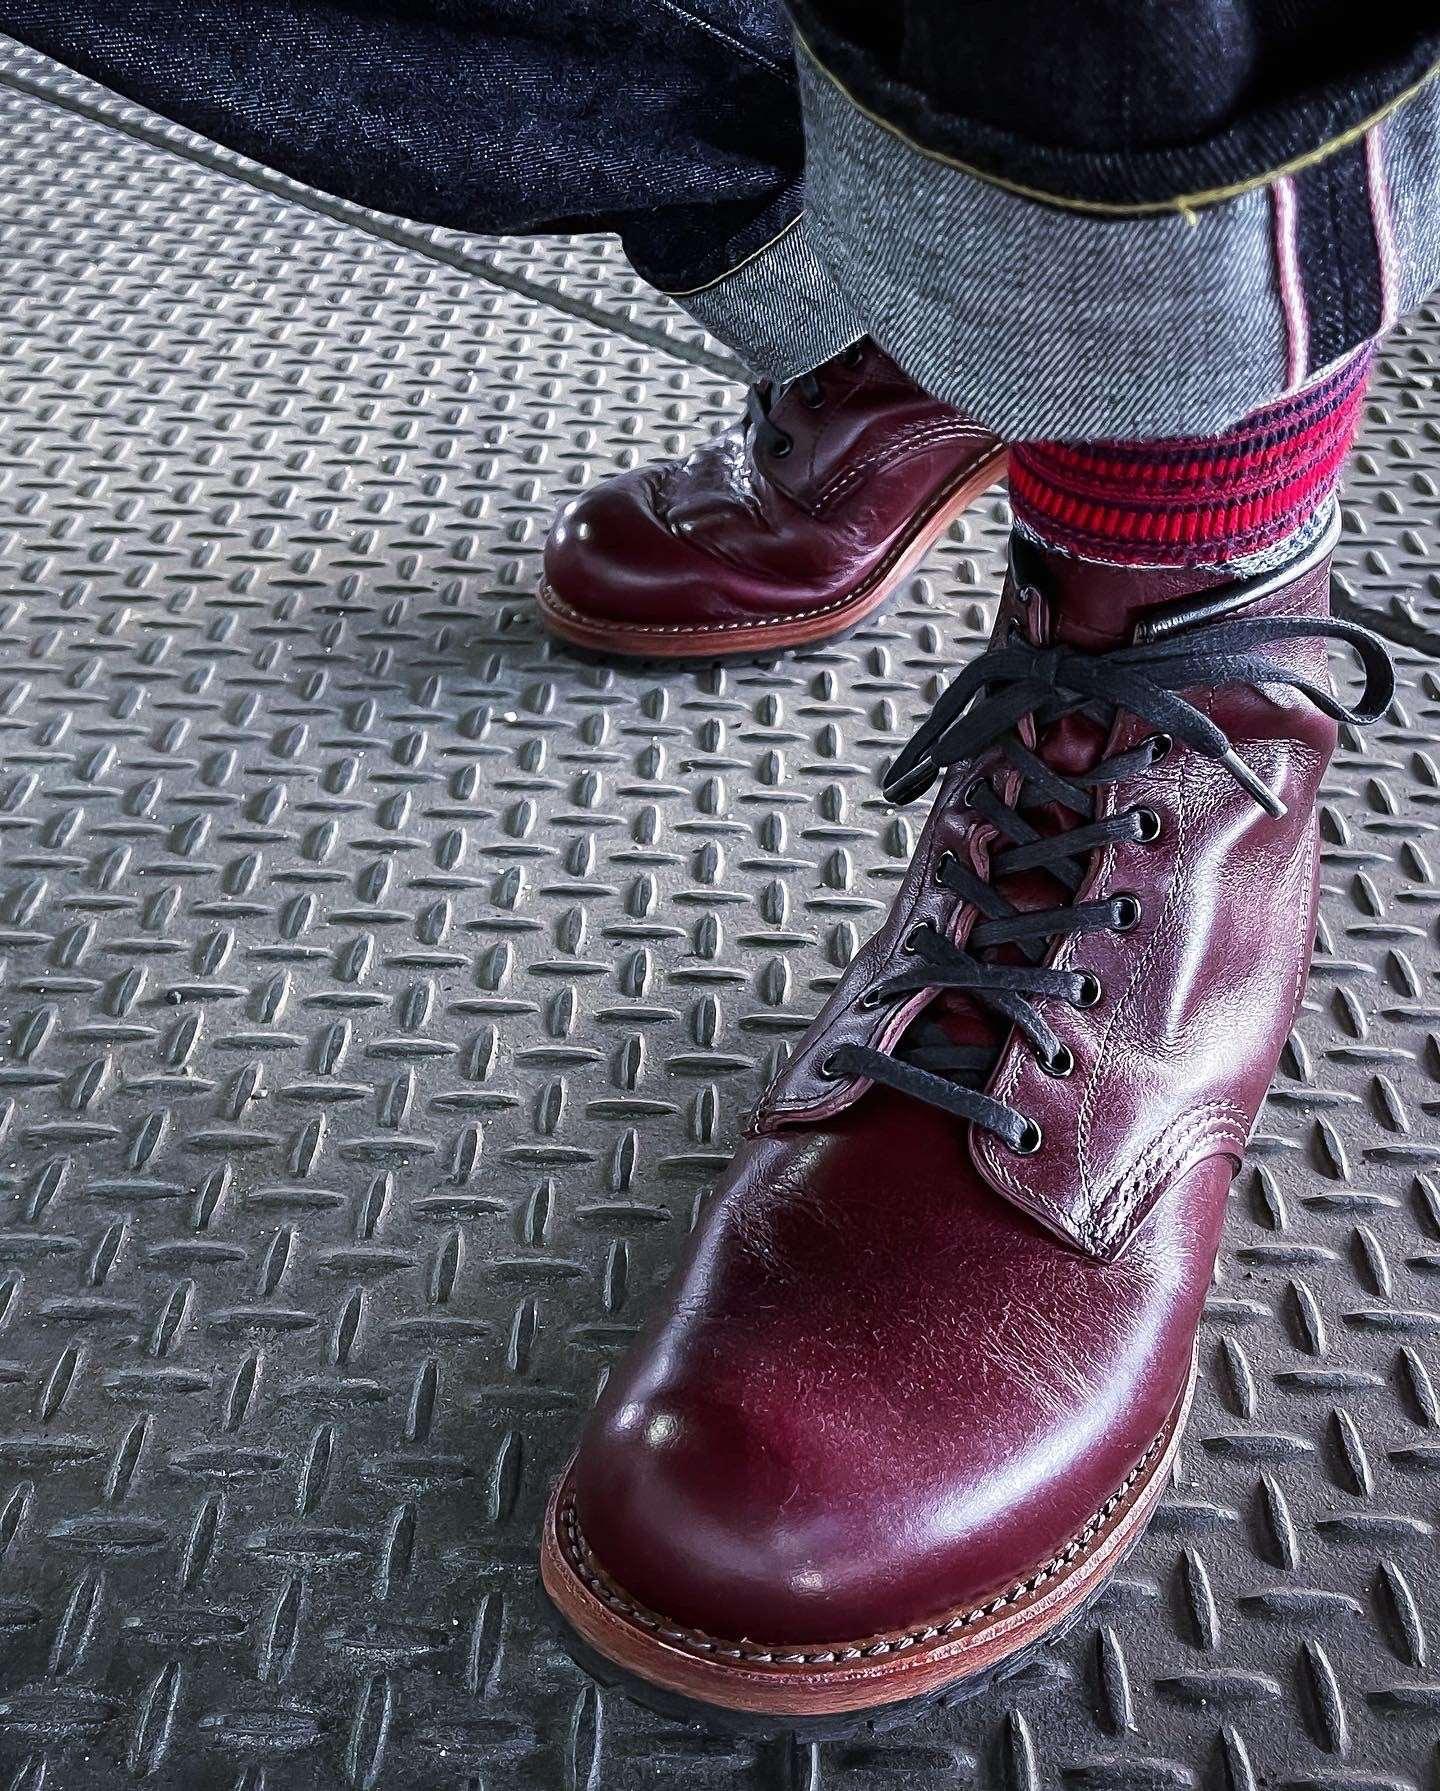 jolly res socks with redwings shoes